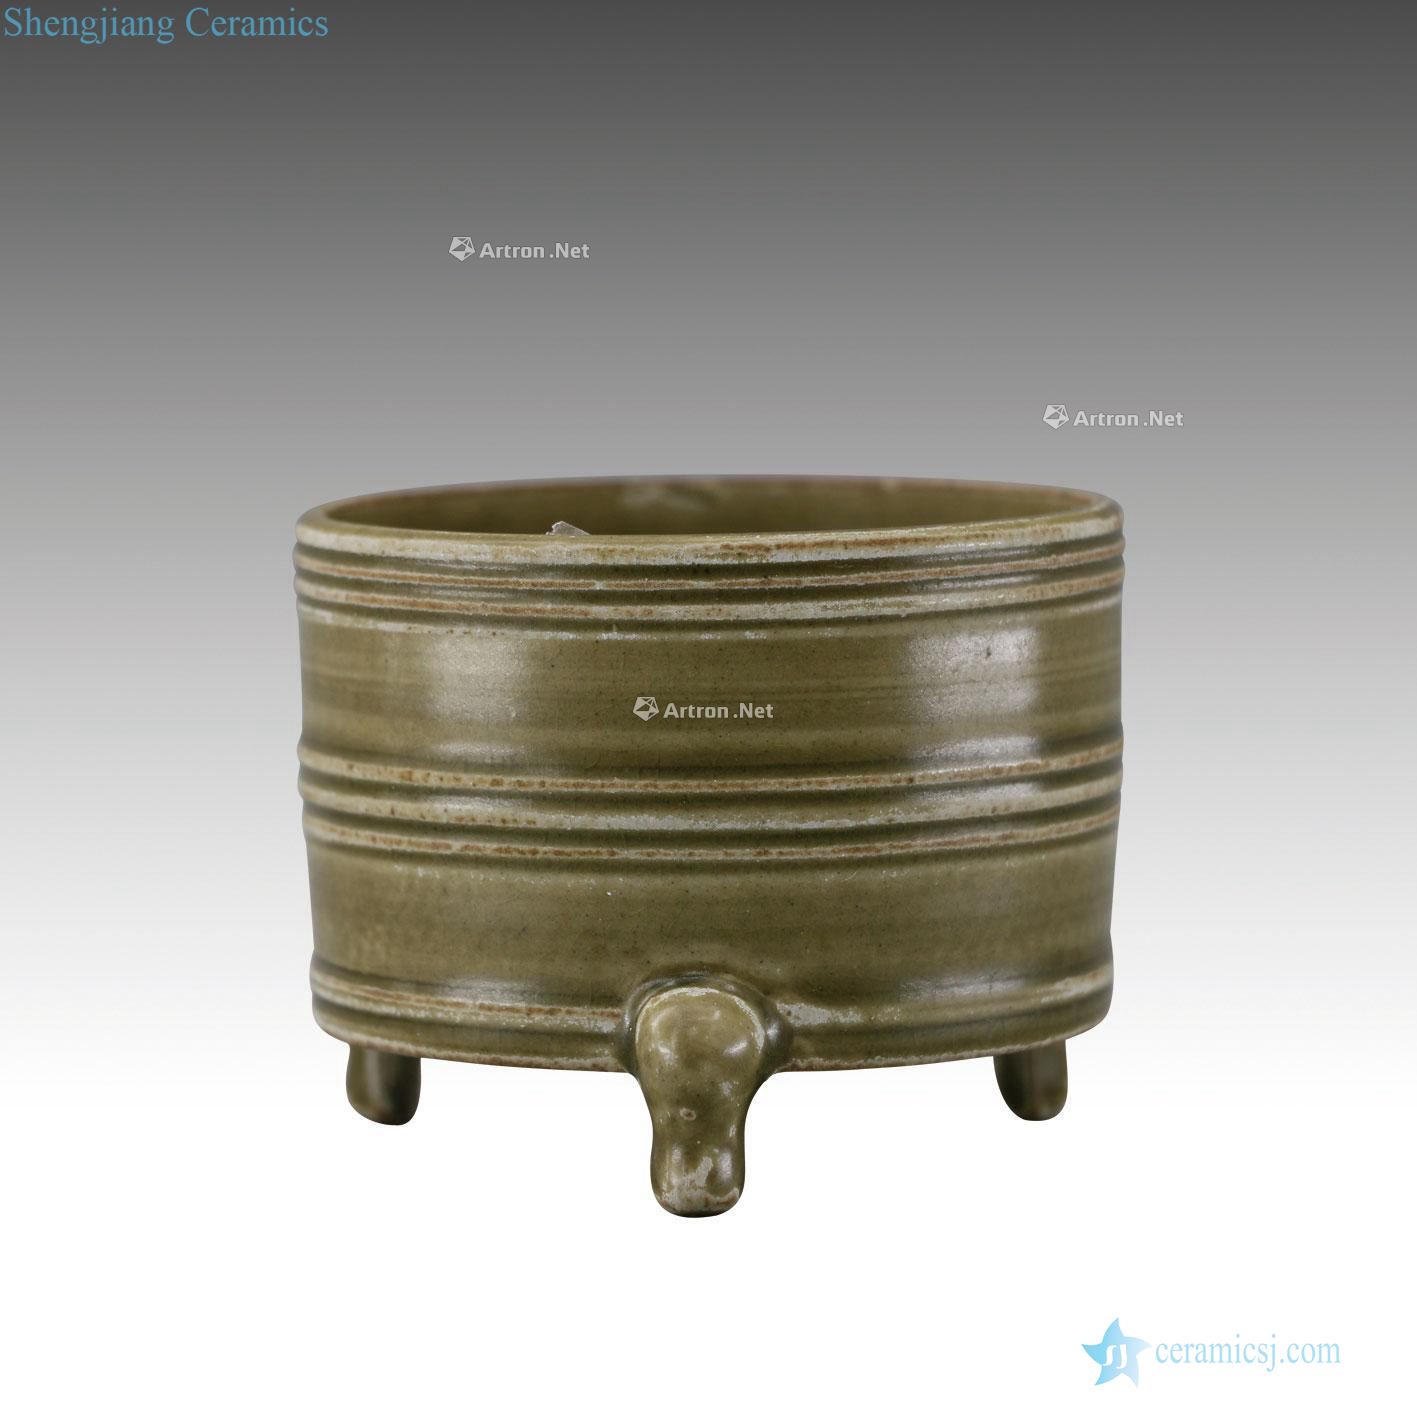 The song dynasty Your kiln casket with three legs